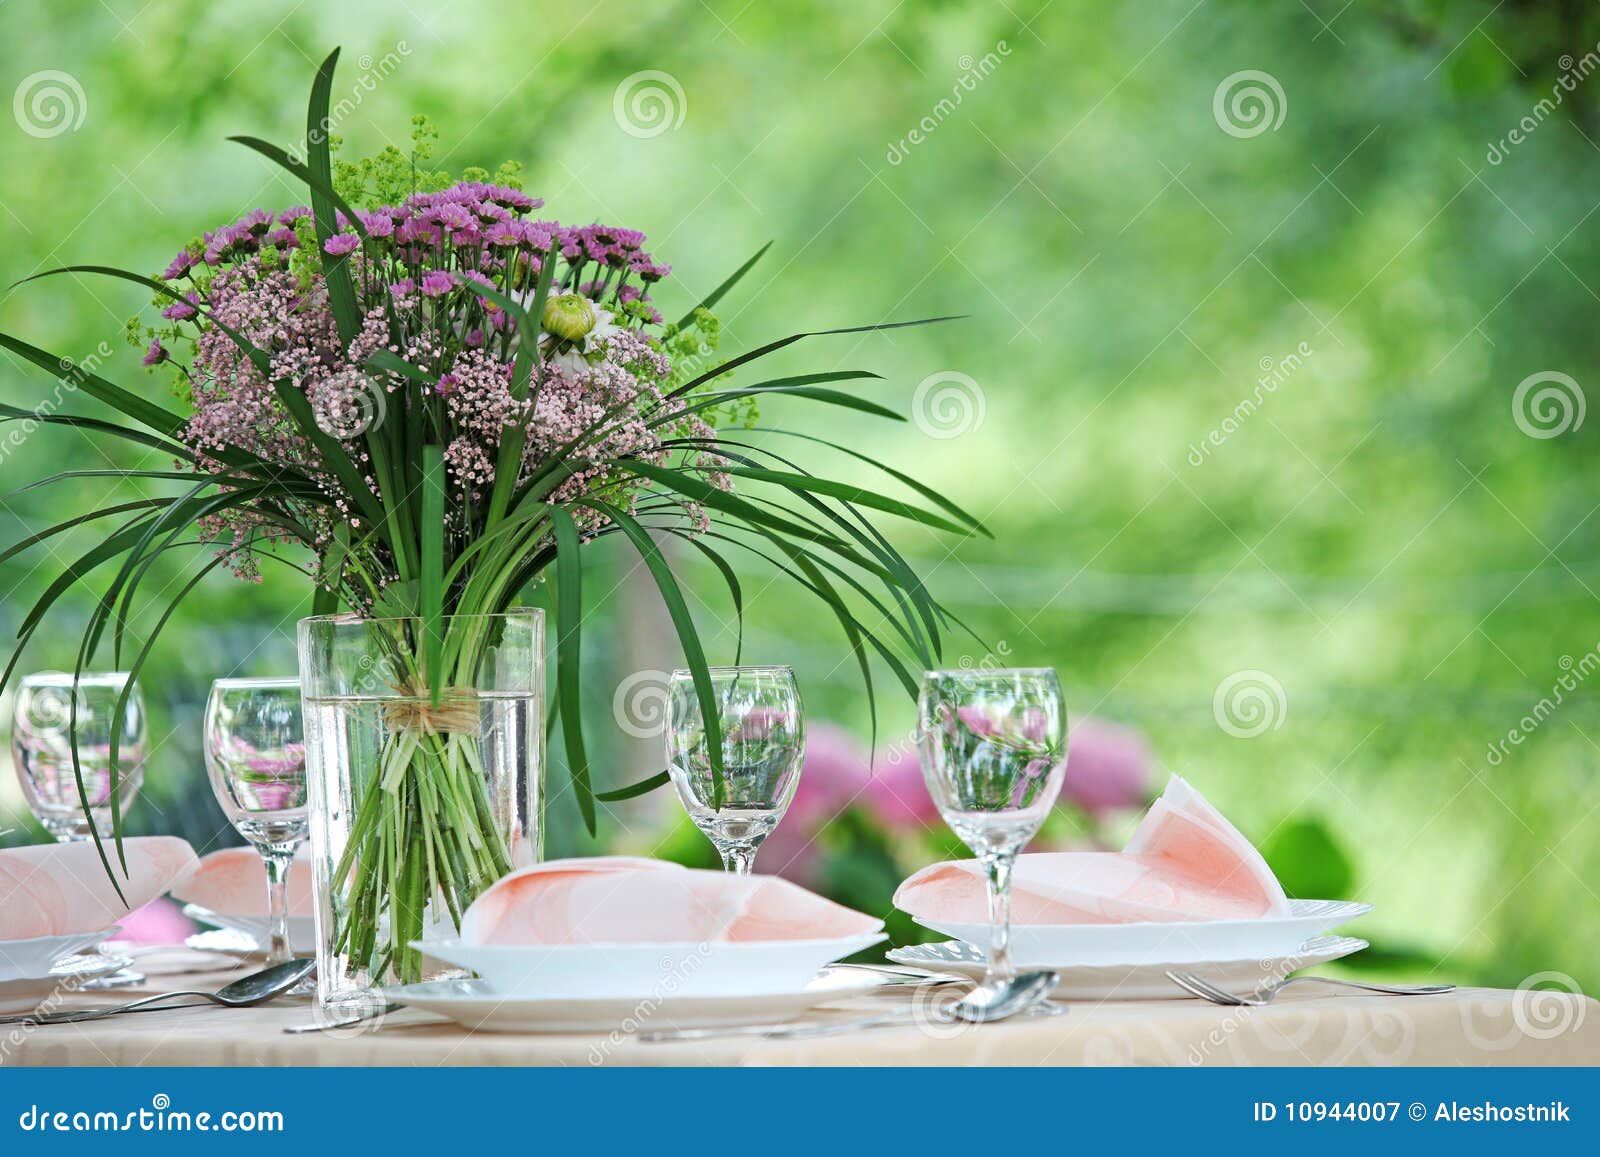 fine banquet table setting with bouquet